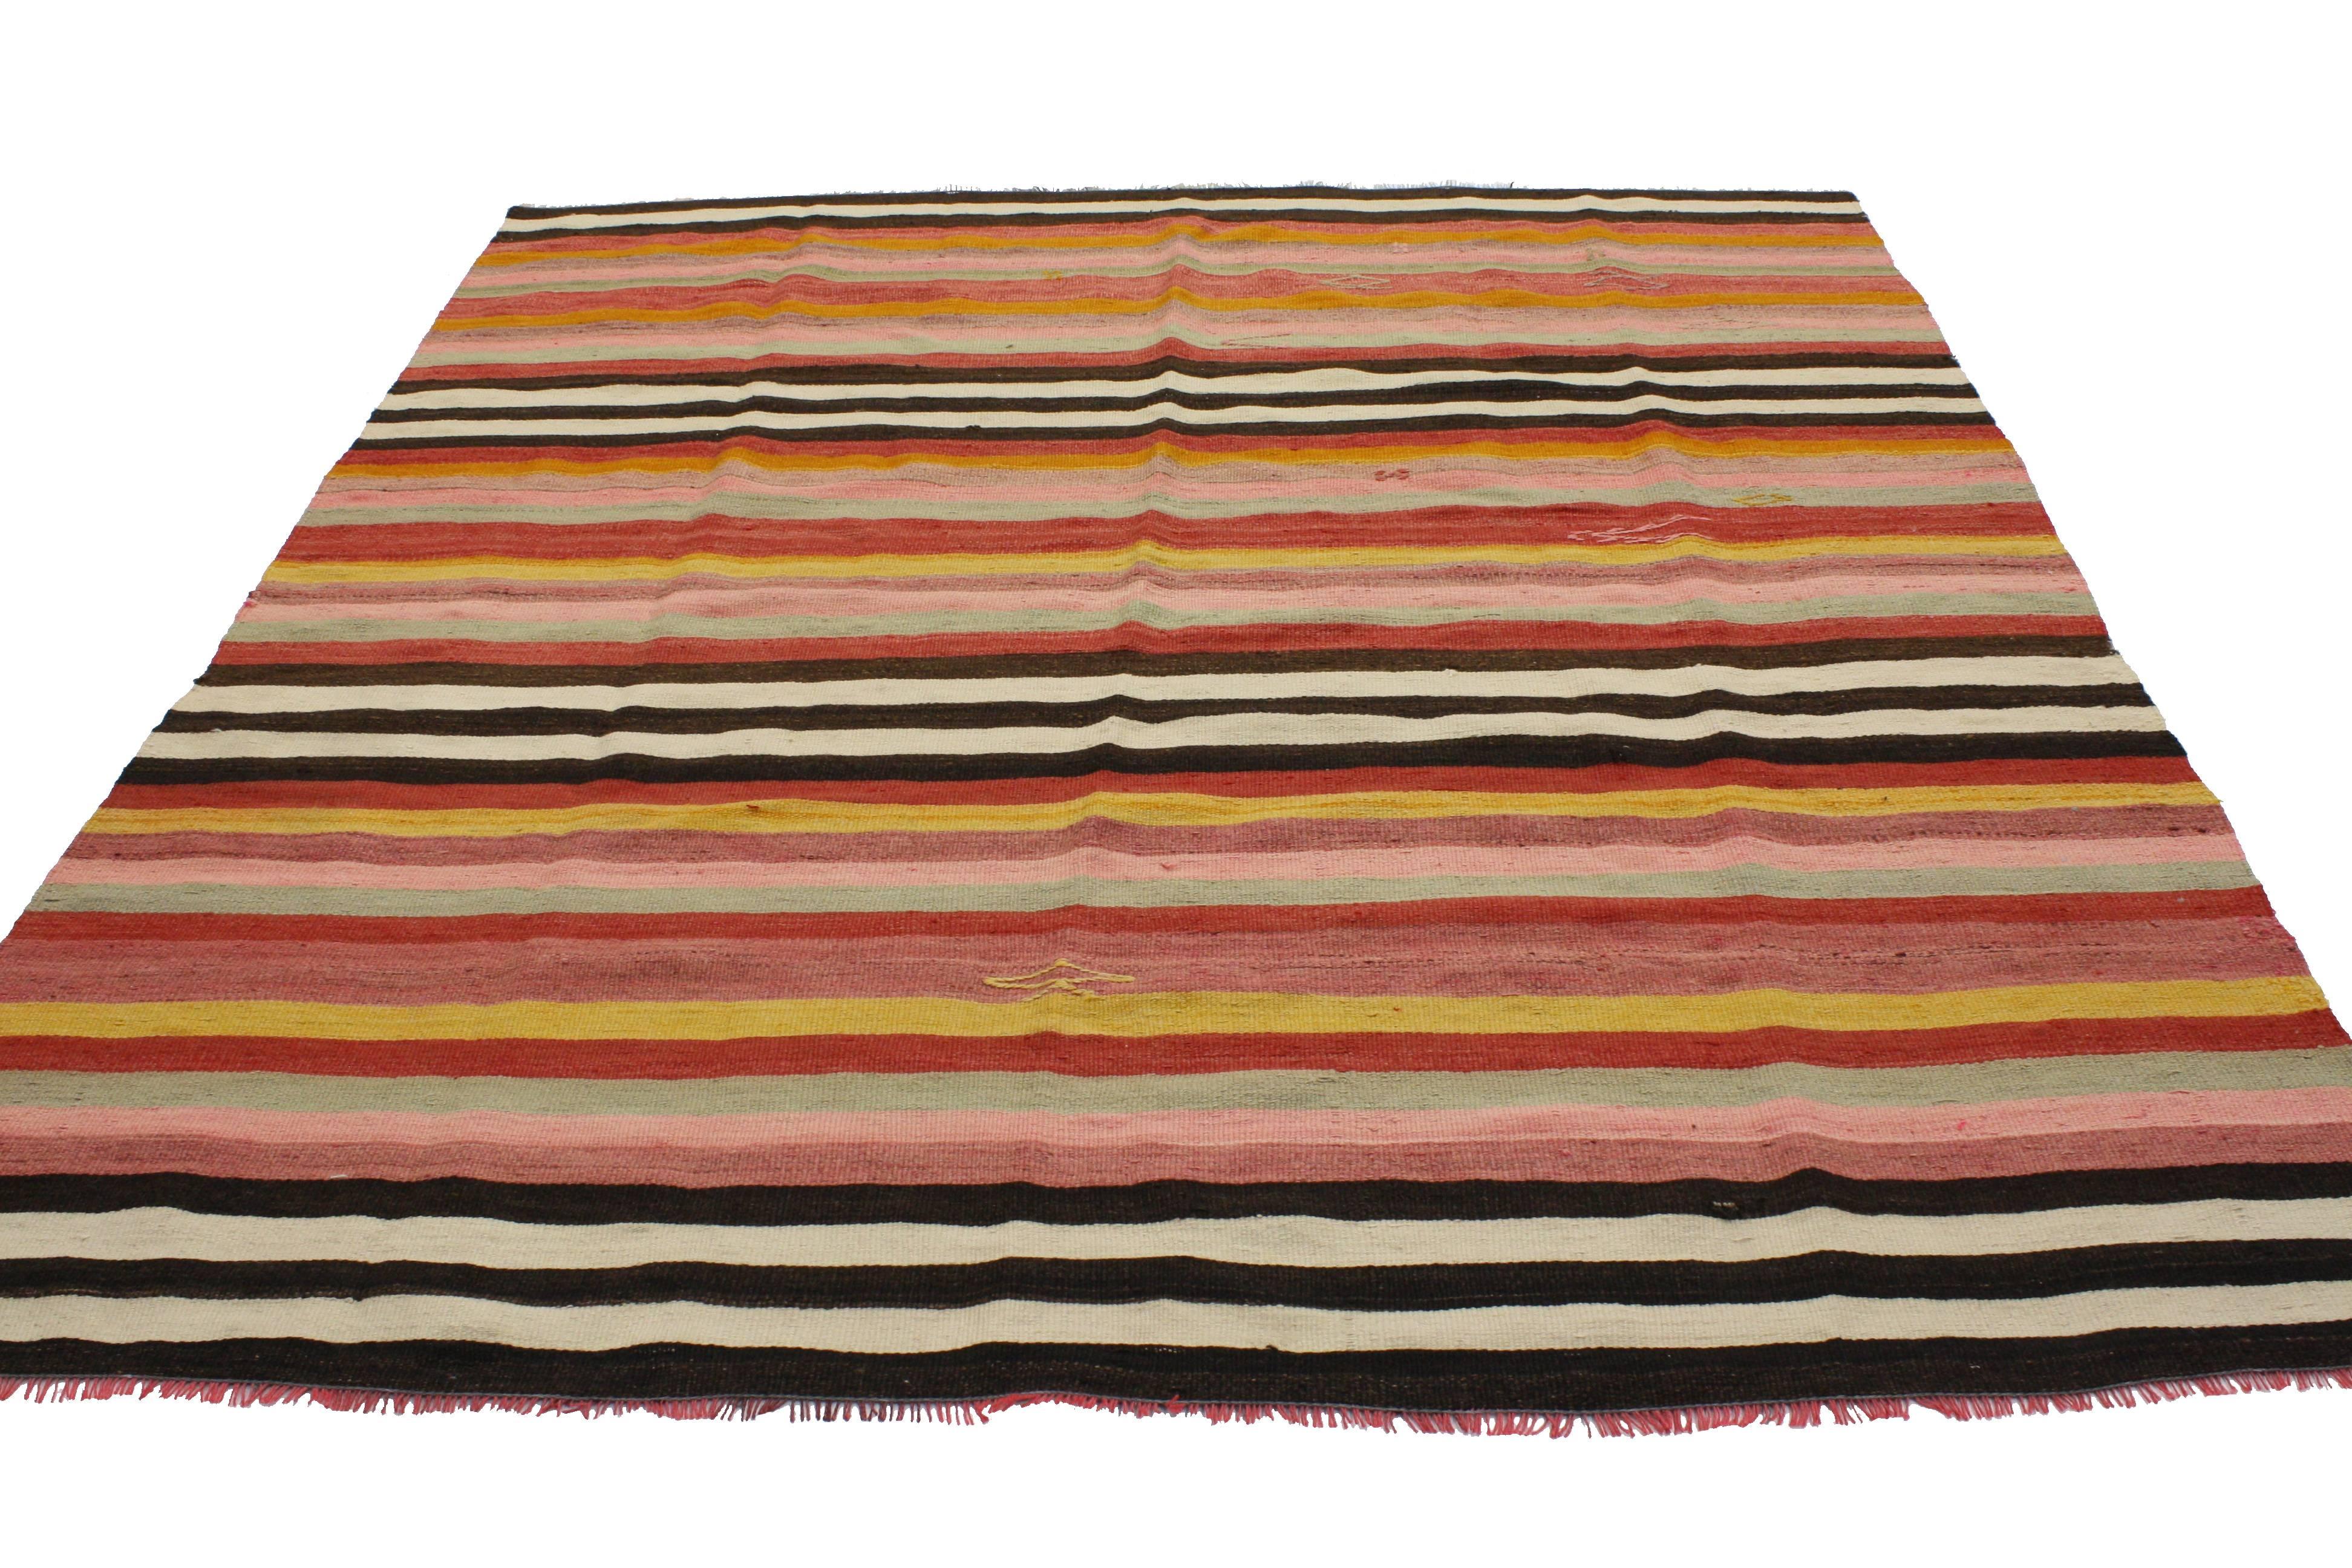 Wool Vintage Turkish Kilim Rug with Stripes and Boho Chic Style, Striped Flat-Weave